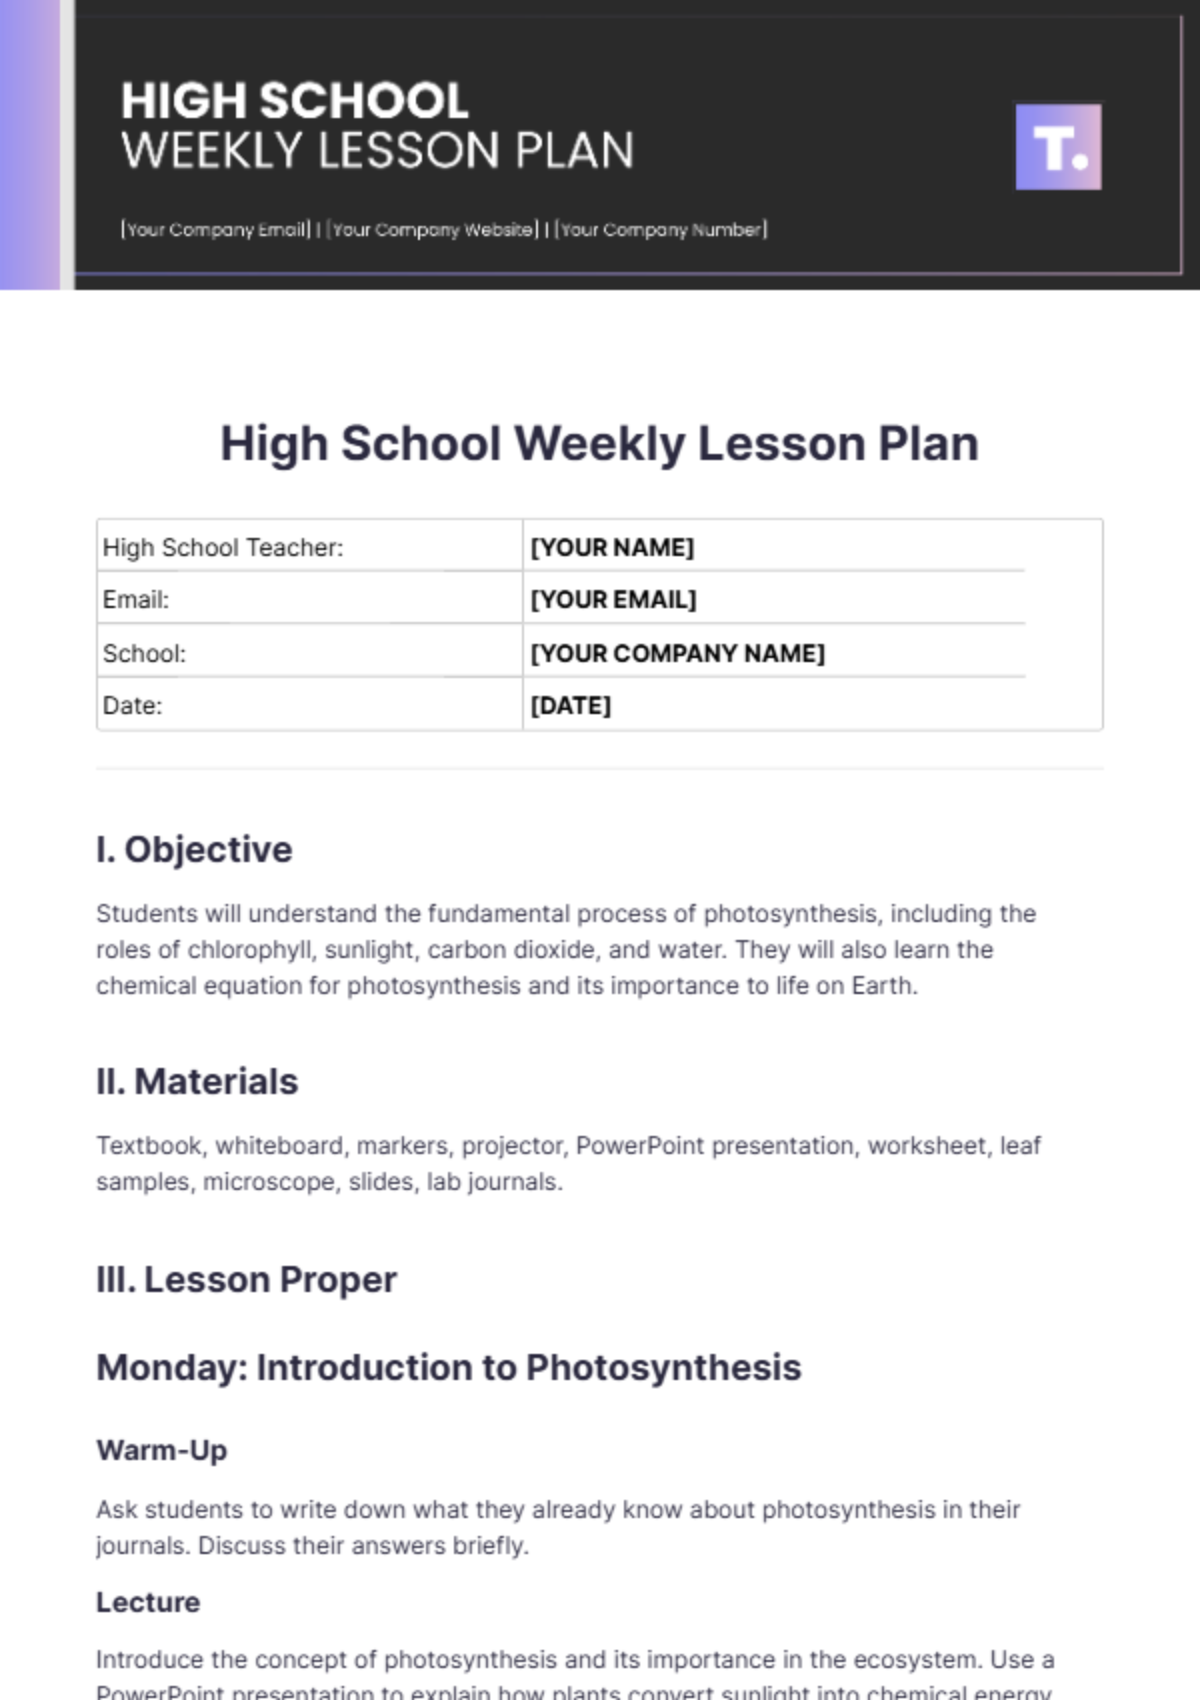 Free High School Weekly Lesson Plan Template